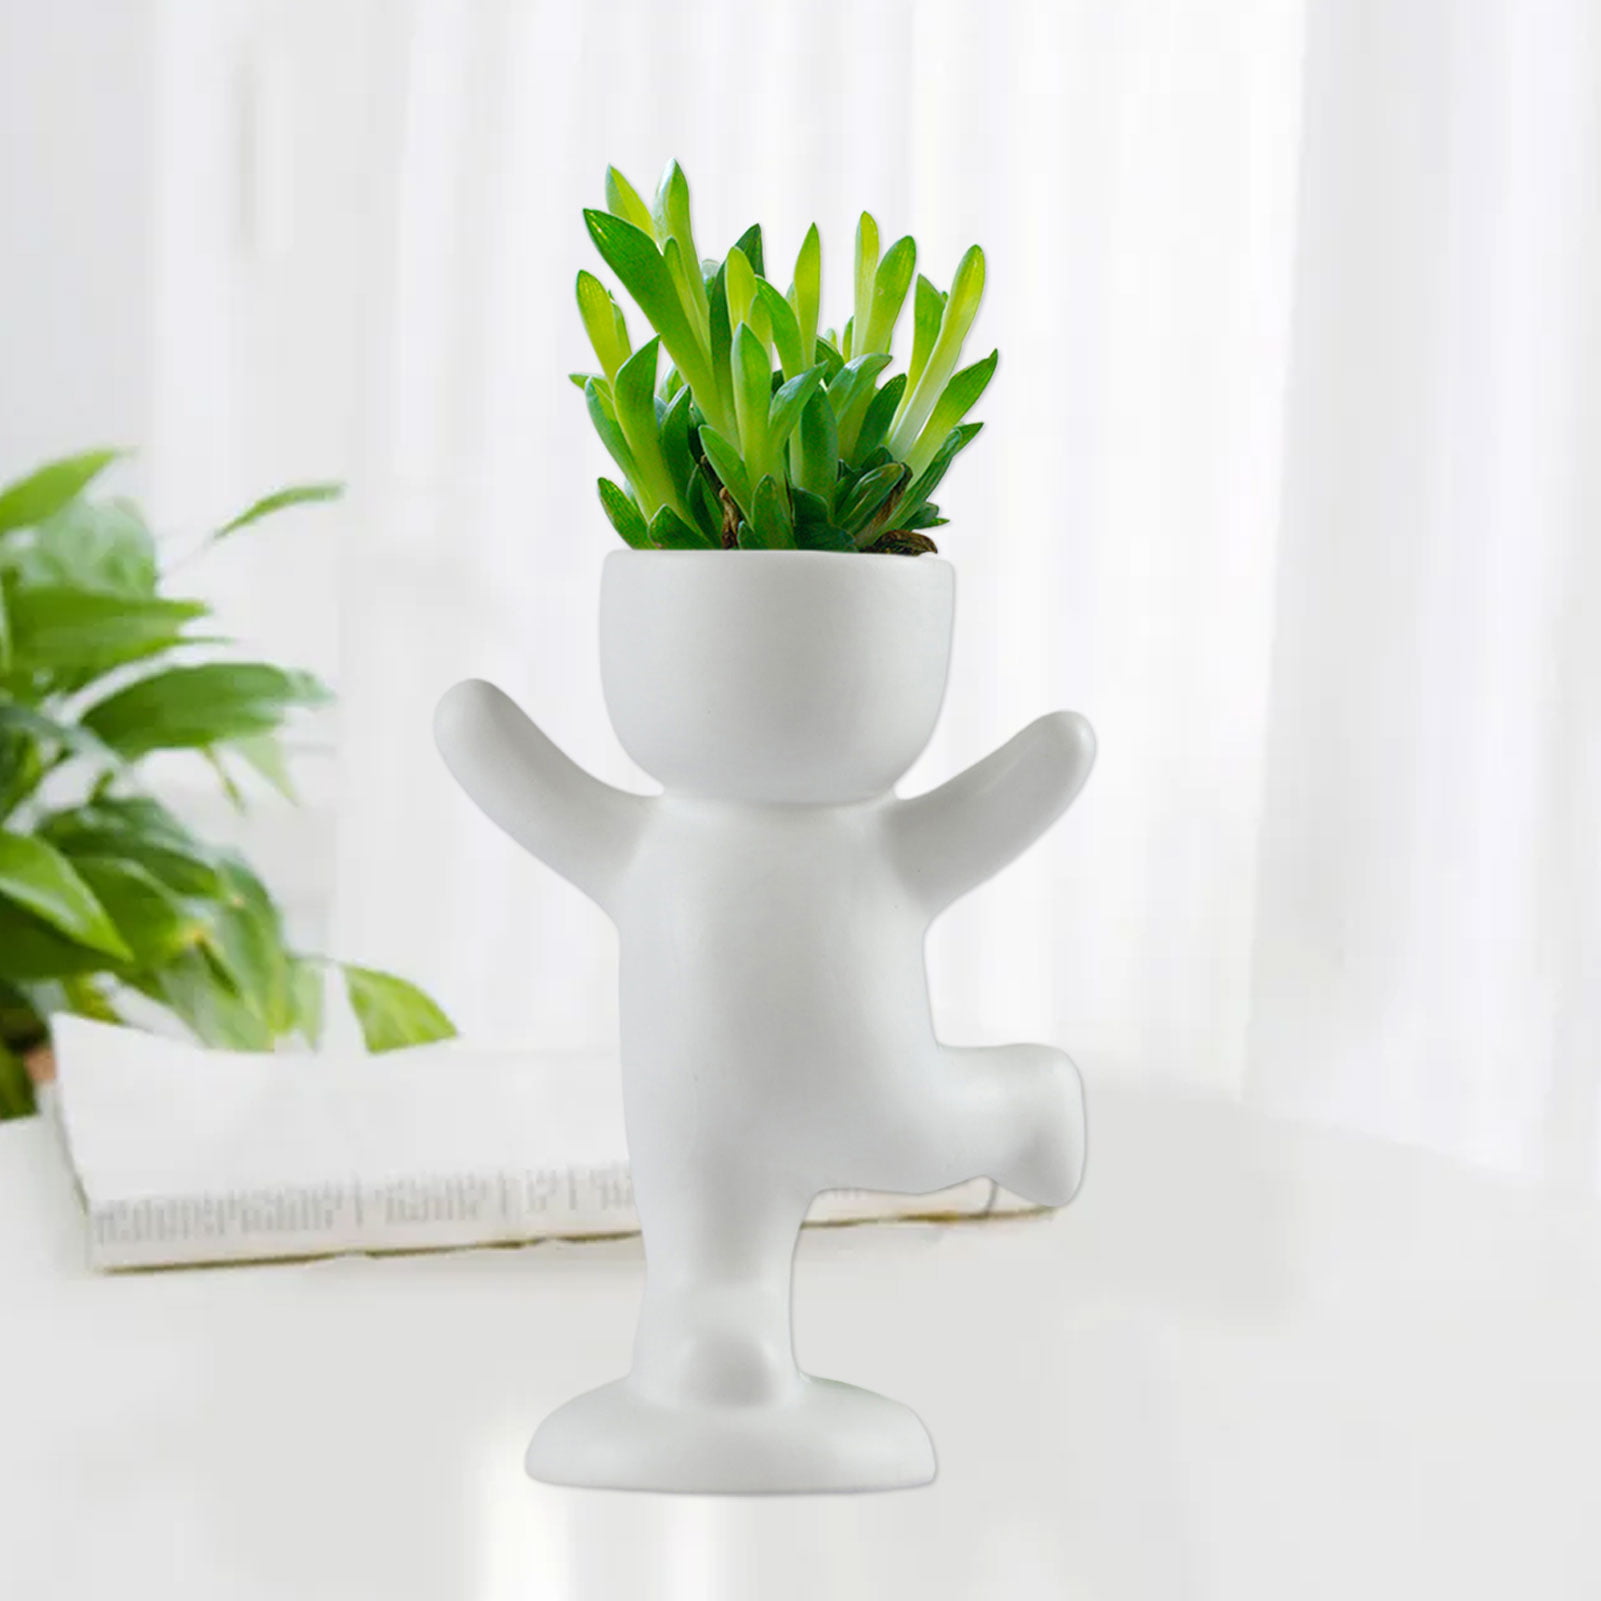 Details about   POT CERAMIC SELF WATERING PLANTER FREE SHIPPING 